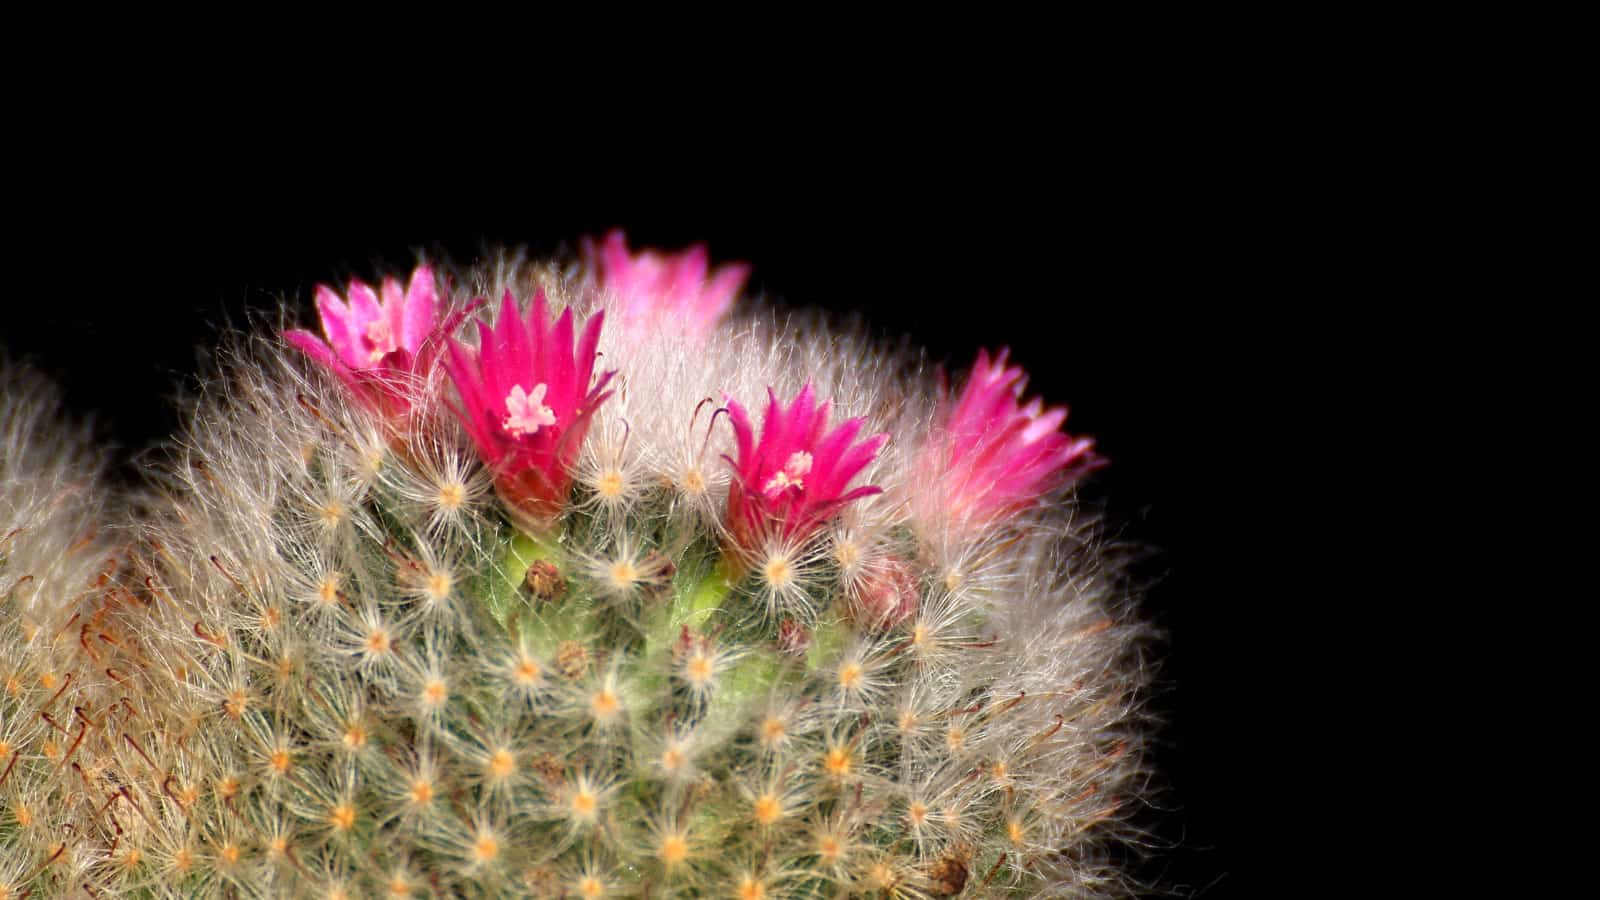 Really bright pink flowers of a Red cactus, 18 Bright Pink Cacti Flowers to Add a Pop of Color - 1600x900